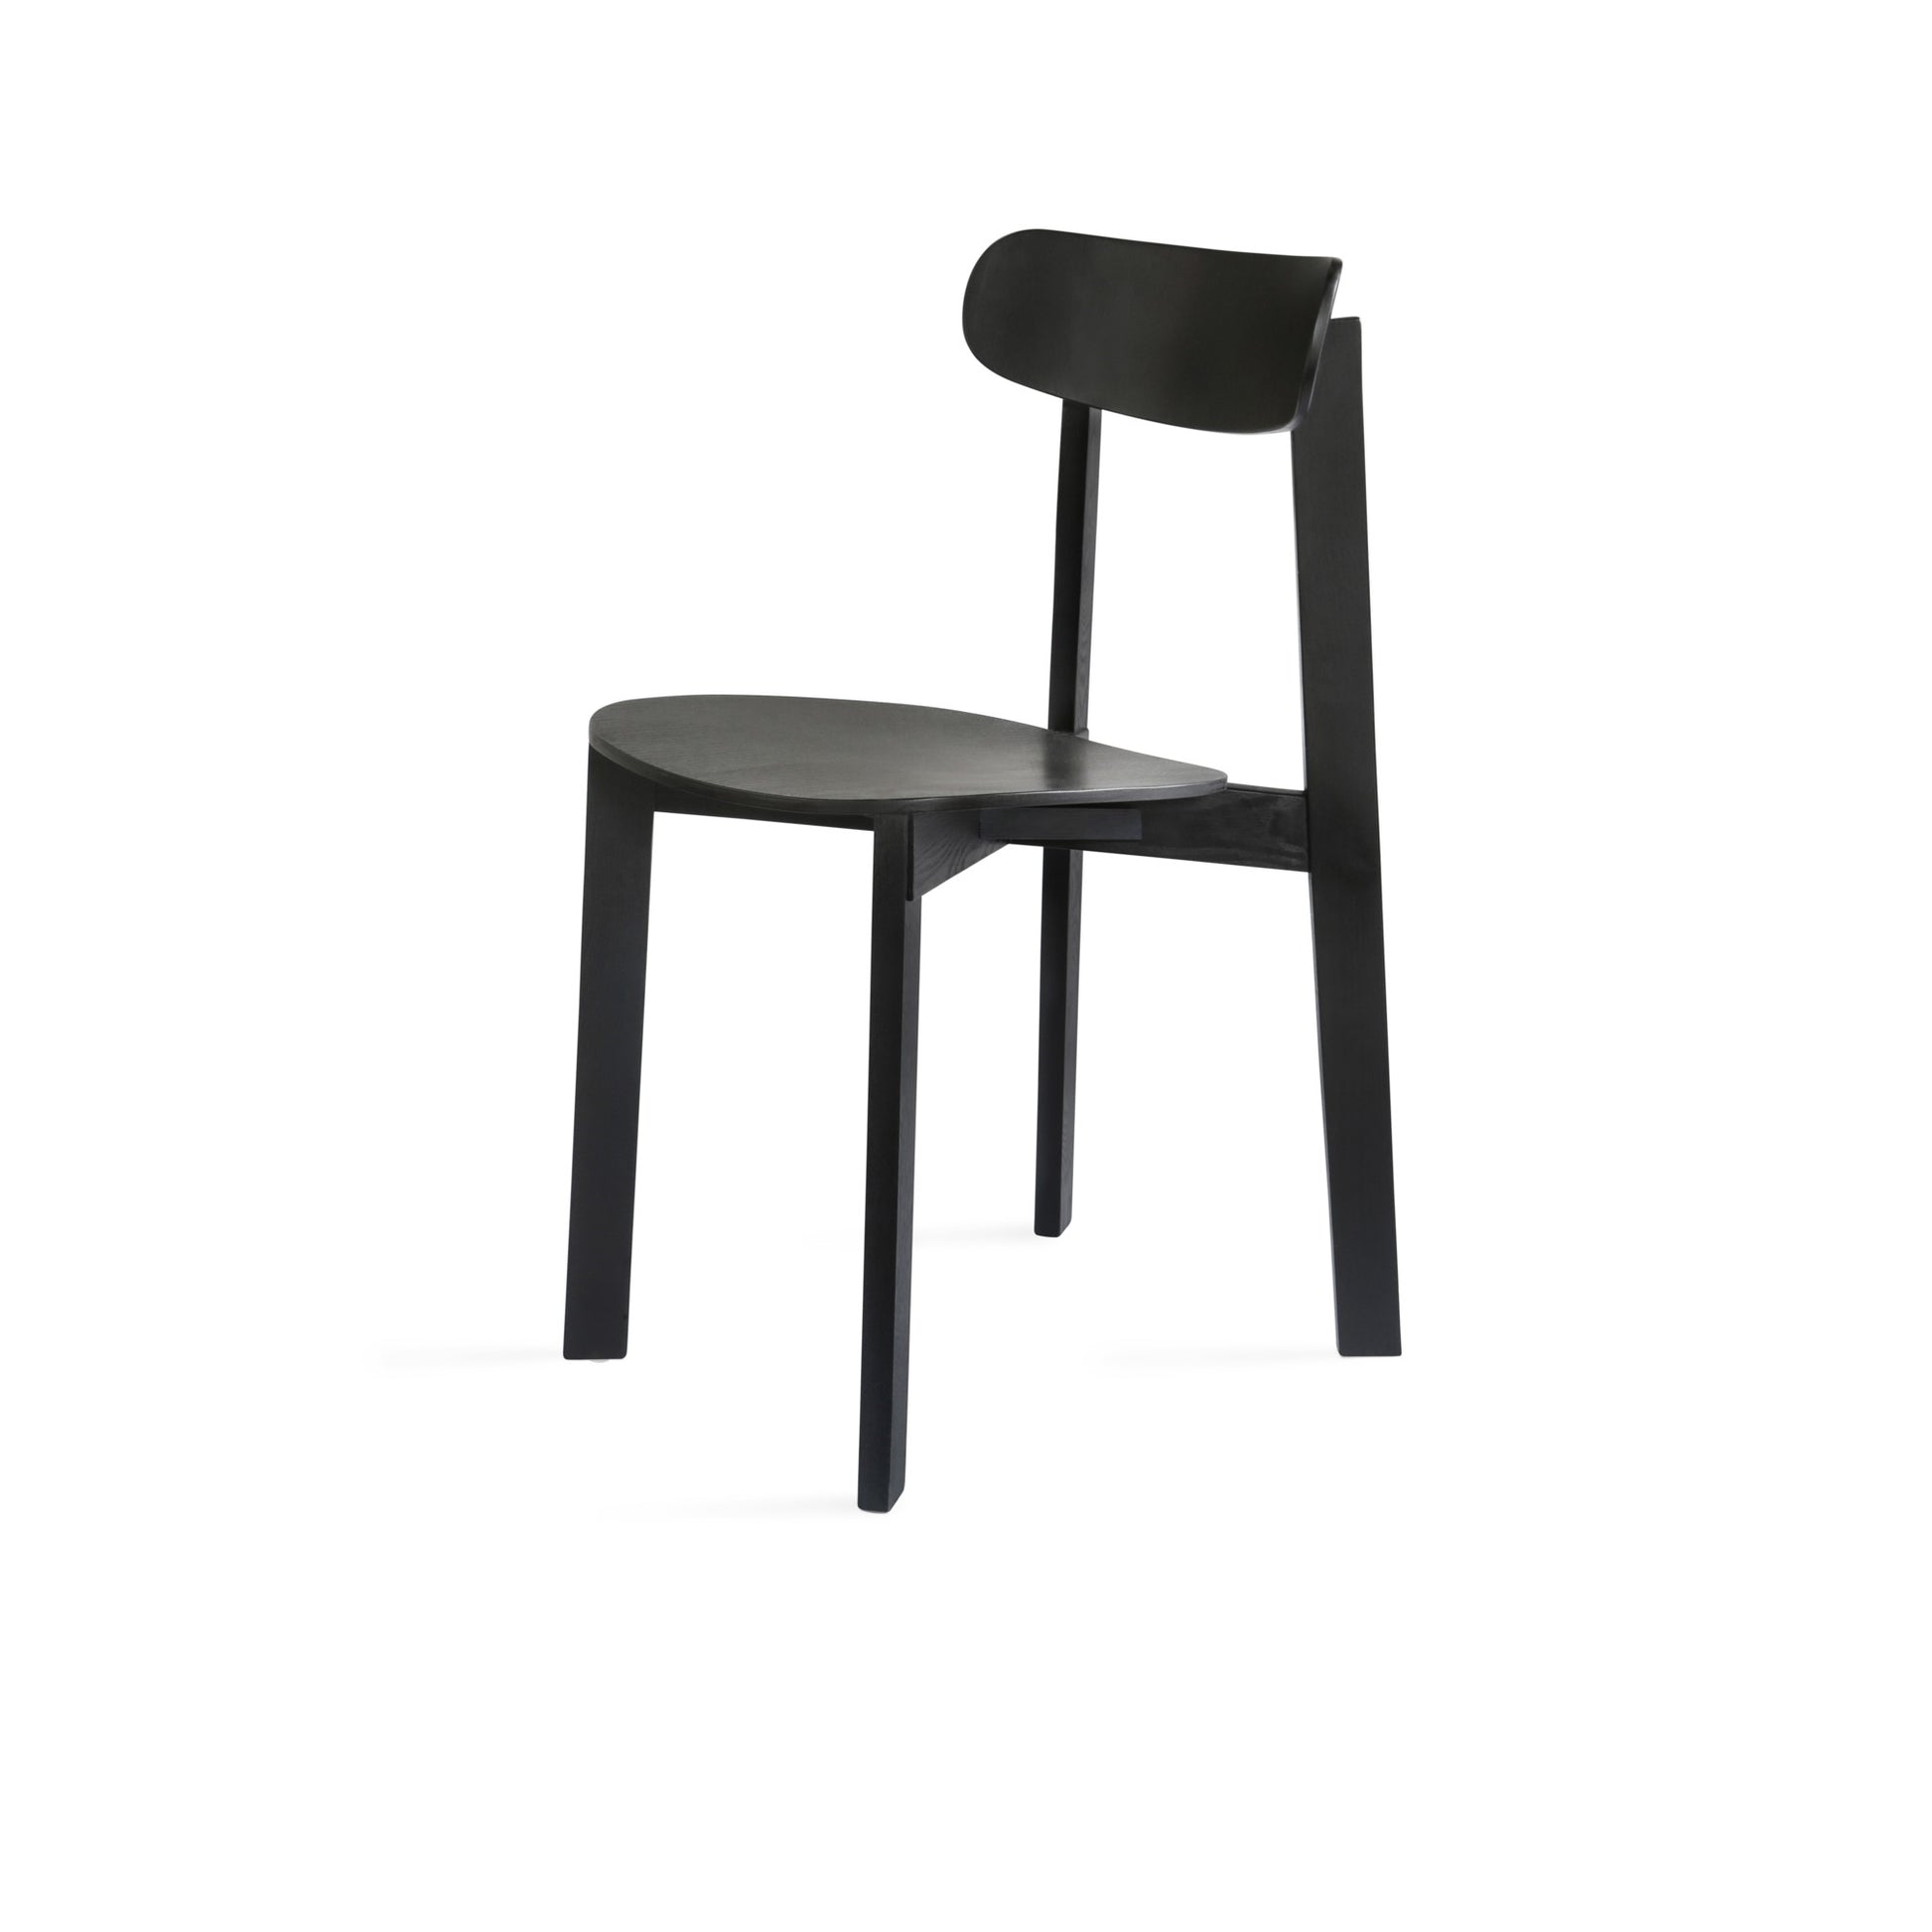 Bondi Dining Chair by Please wait to be seated #Black